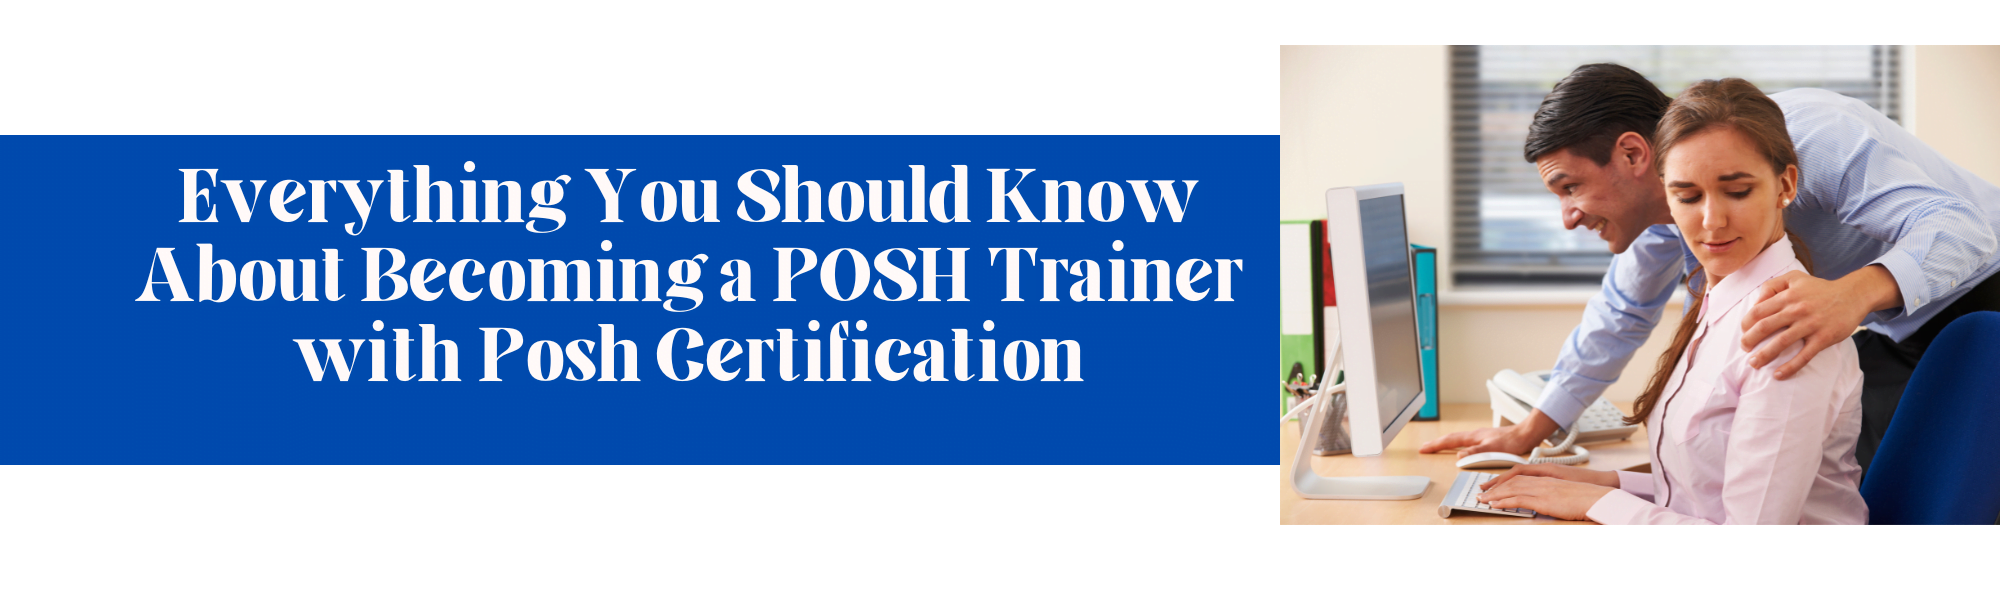 Everything You Should Know About Becoming a POSH Trainer with Posh Certification